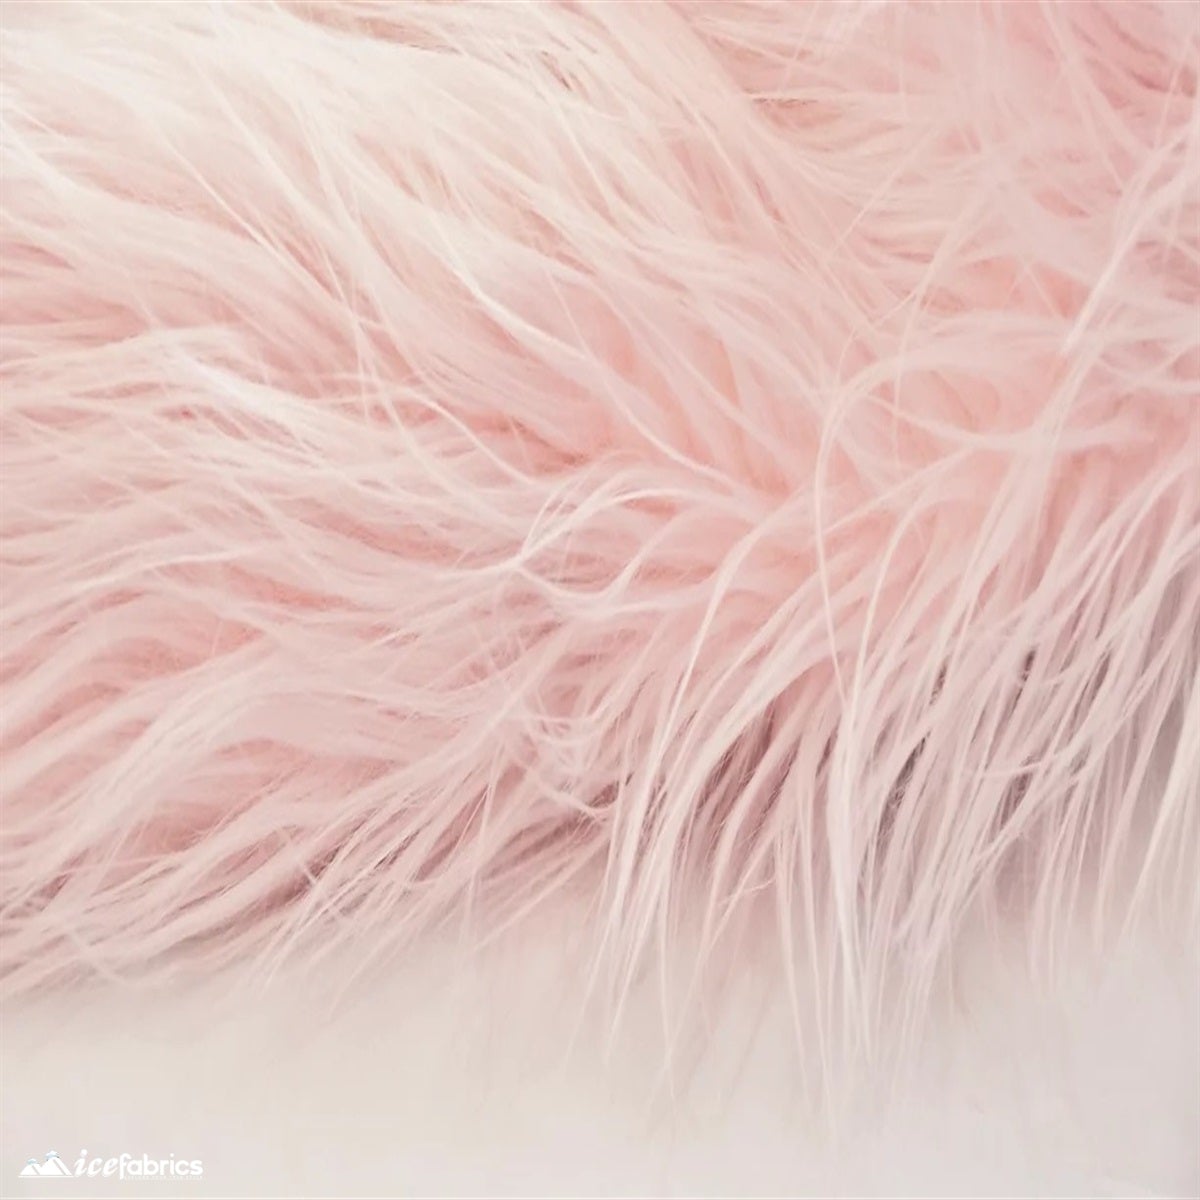 Mohair Faux Fur Fabric By The Roll (20 Yards) 4 Inch PileICE FABRICSICE FABRICSPinkBy The Roll (60" Wide)Mohair Faux Fur Fabric By The Roll (20 Yards) 4 Inch Pile ICE FABRICS